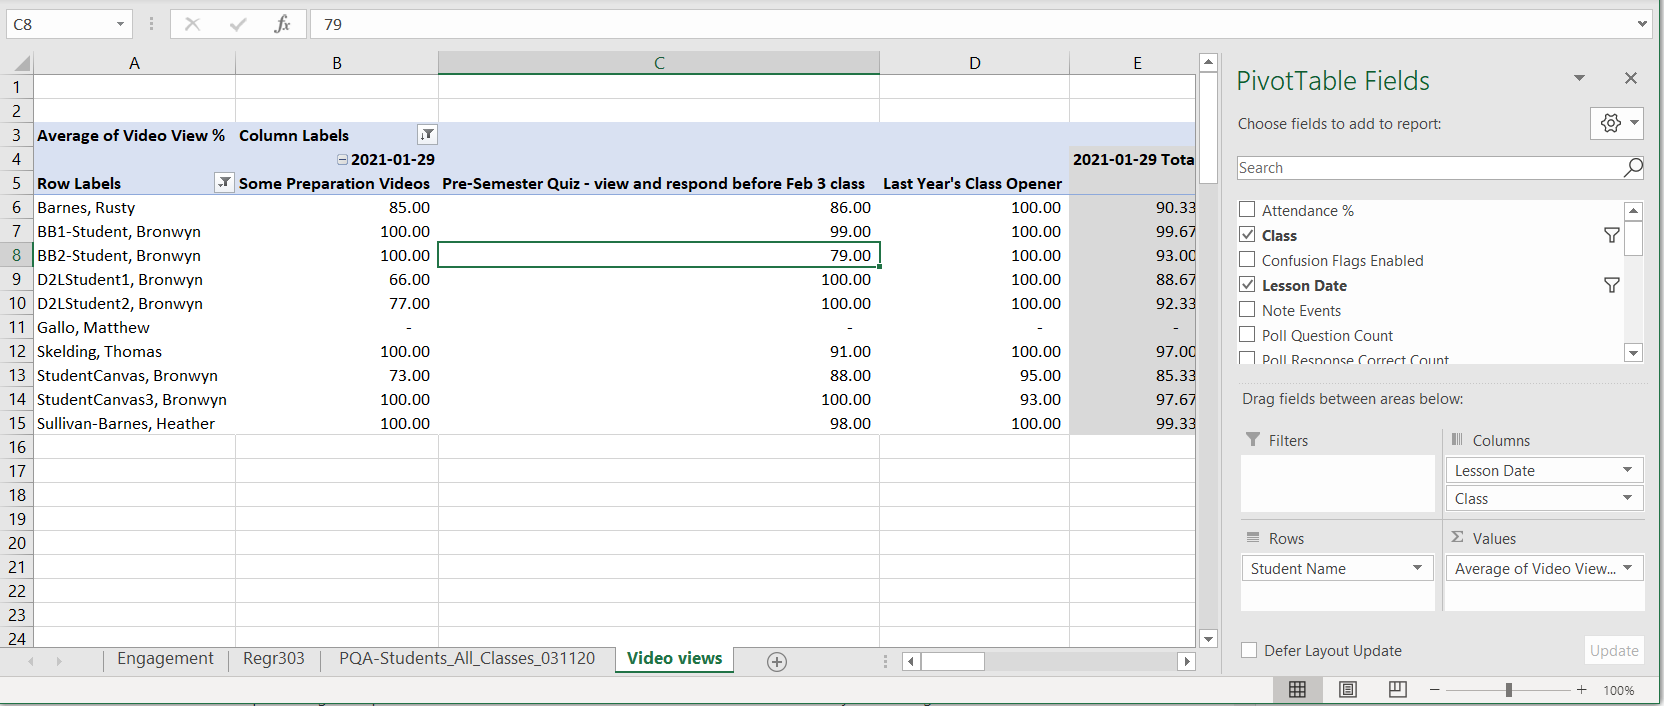 Excel with a completed pivot table showing video view percentage data for the students and classes in the original data sheet